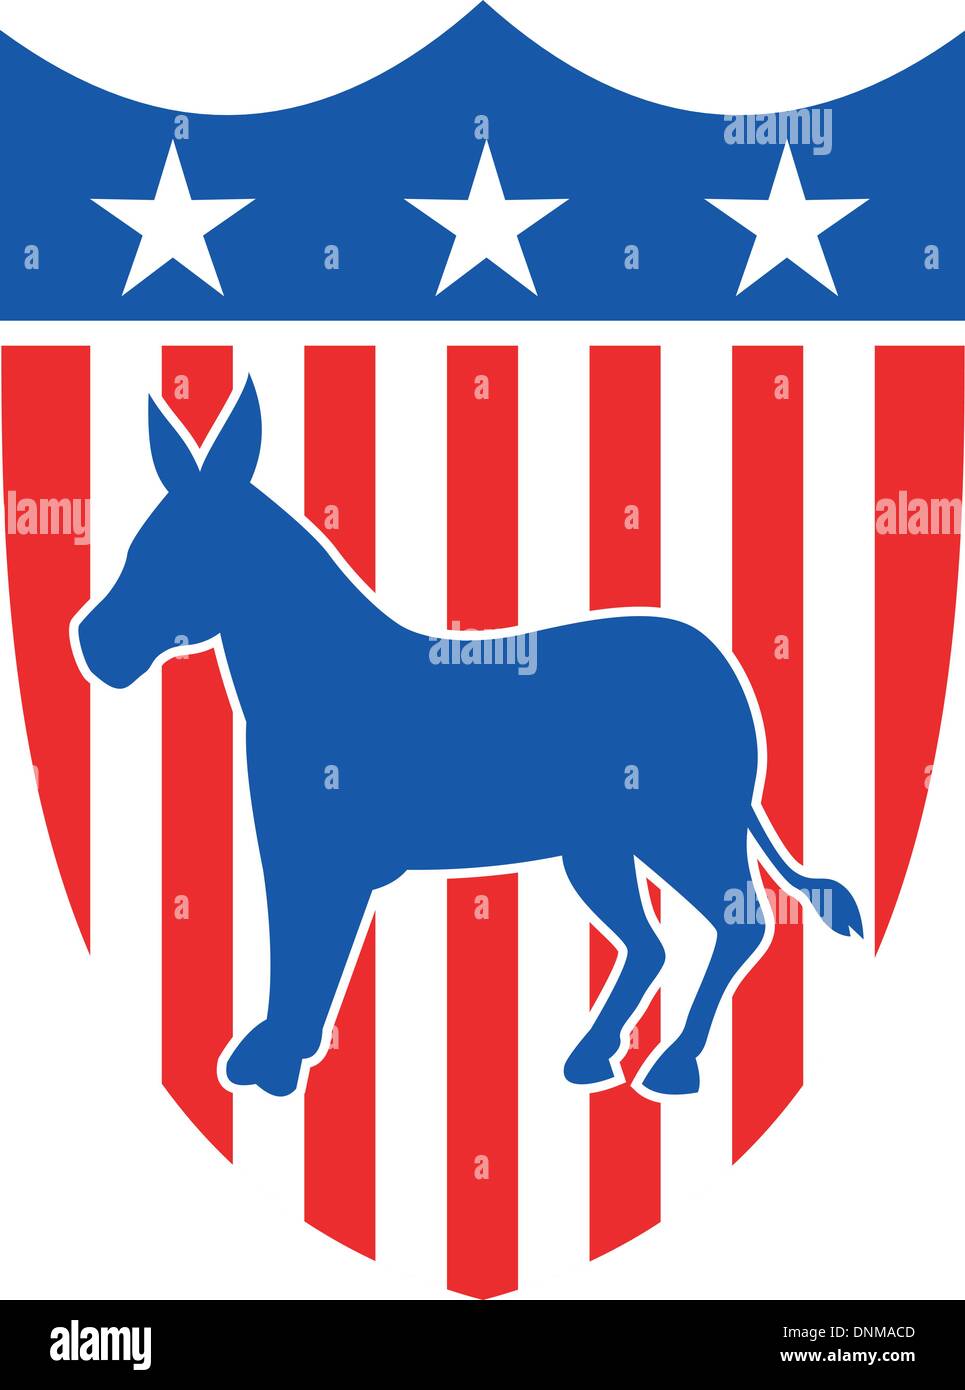 Illustration of a democrat donkey mascot of the democratic grand old party gop with a stars and stripes shield. Stock Vector